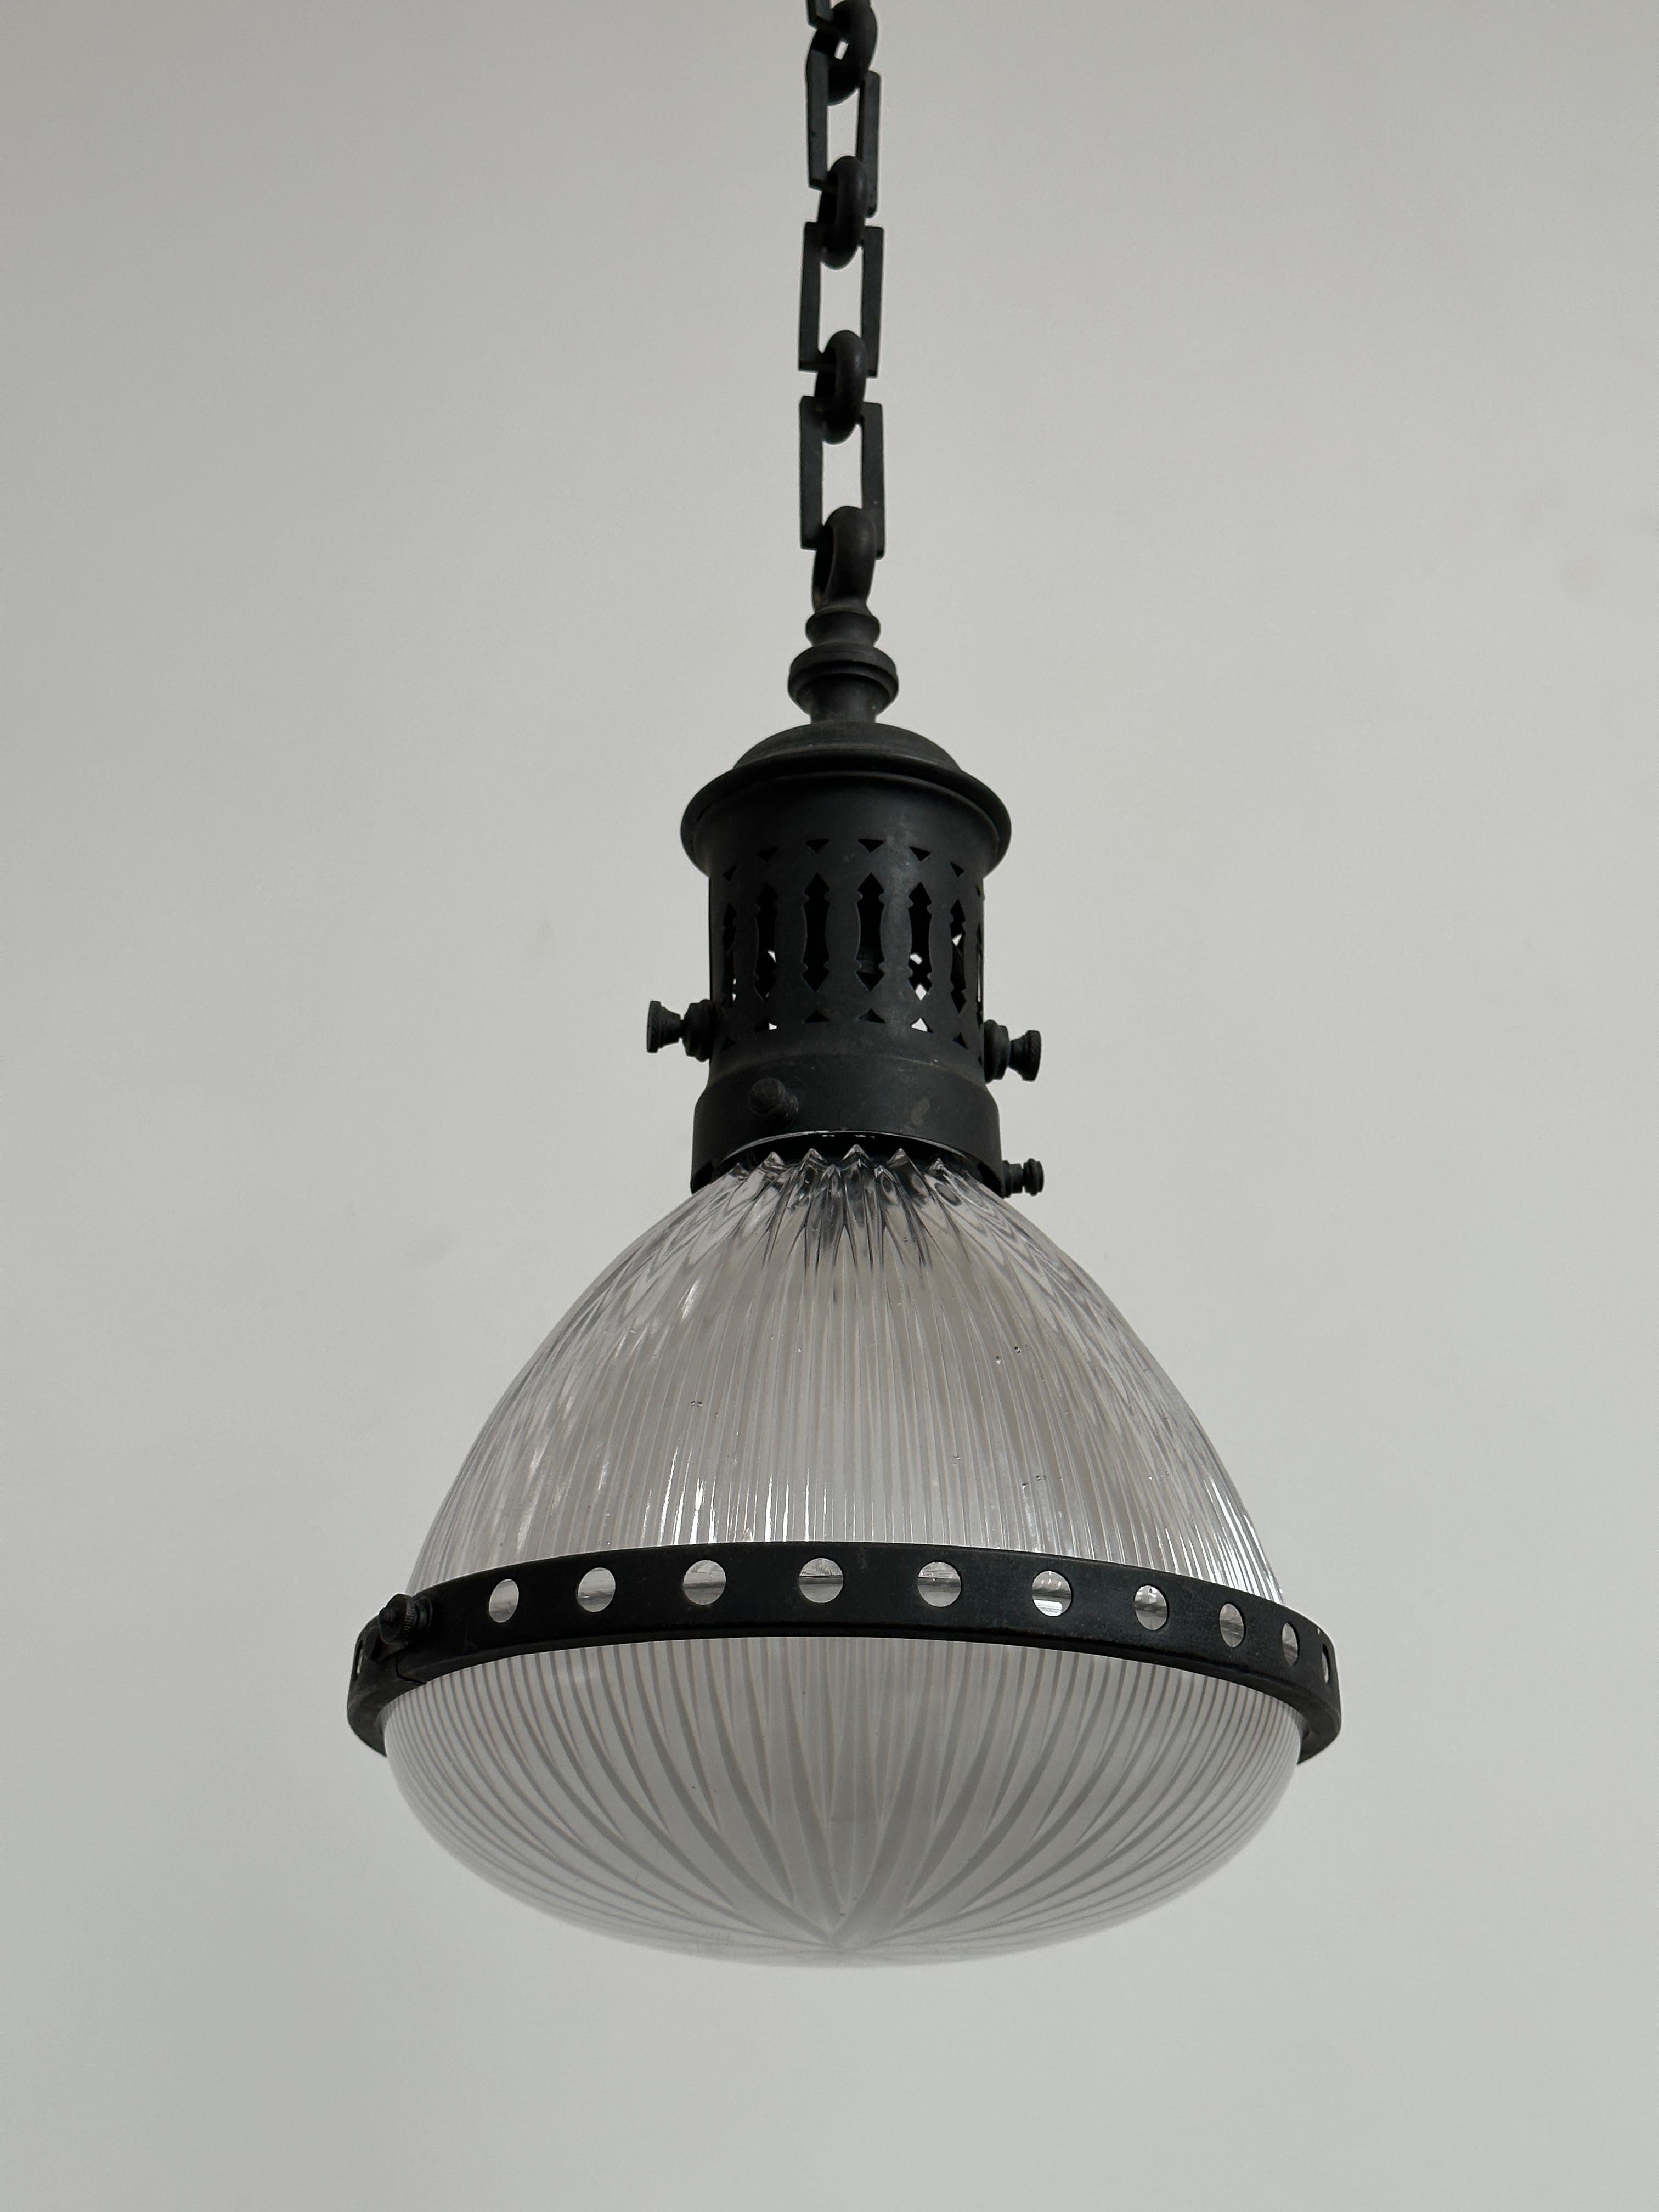 Antique Vintage Industrial Original French Caged Holophane Ceiling Pendant Light In Good Condition For Sale In Sale, GB